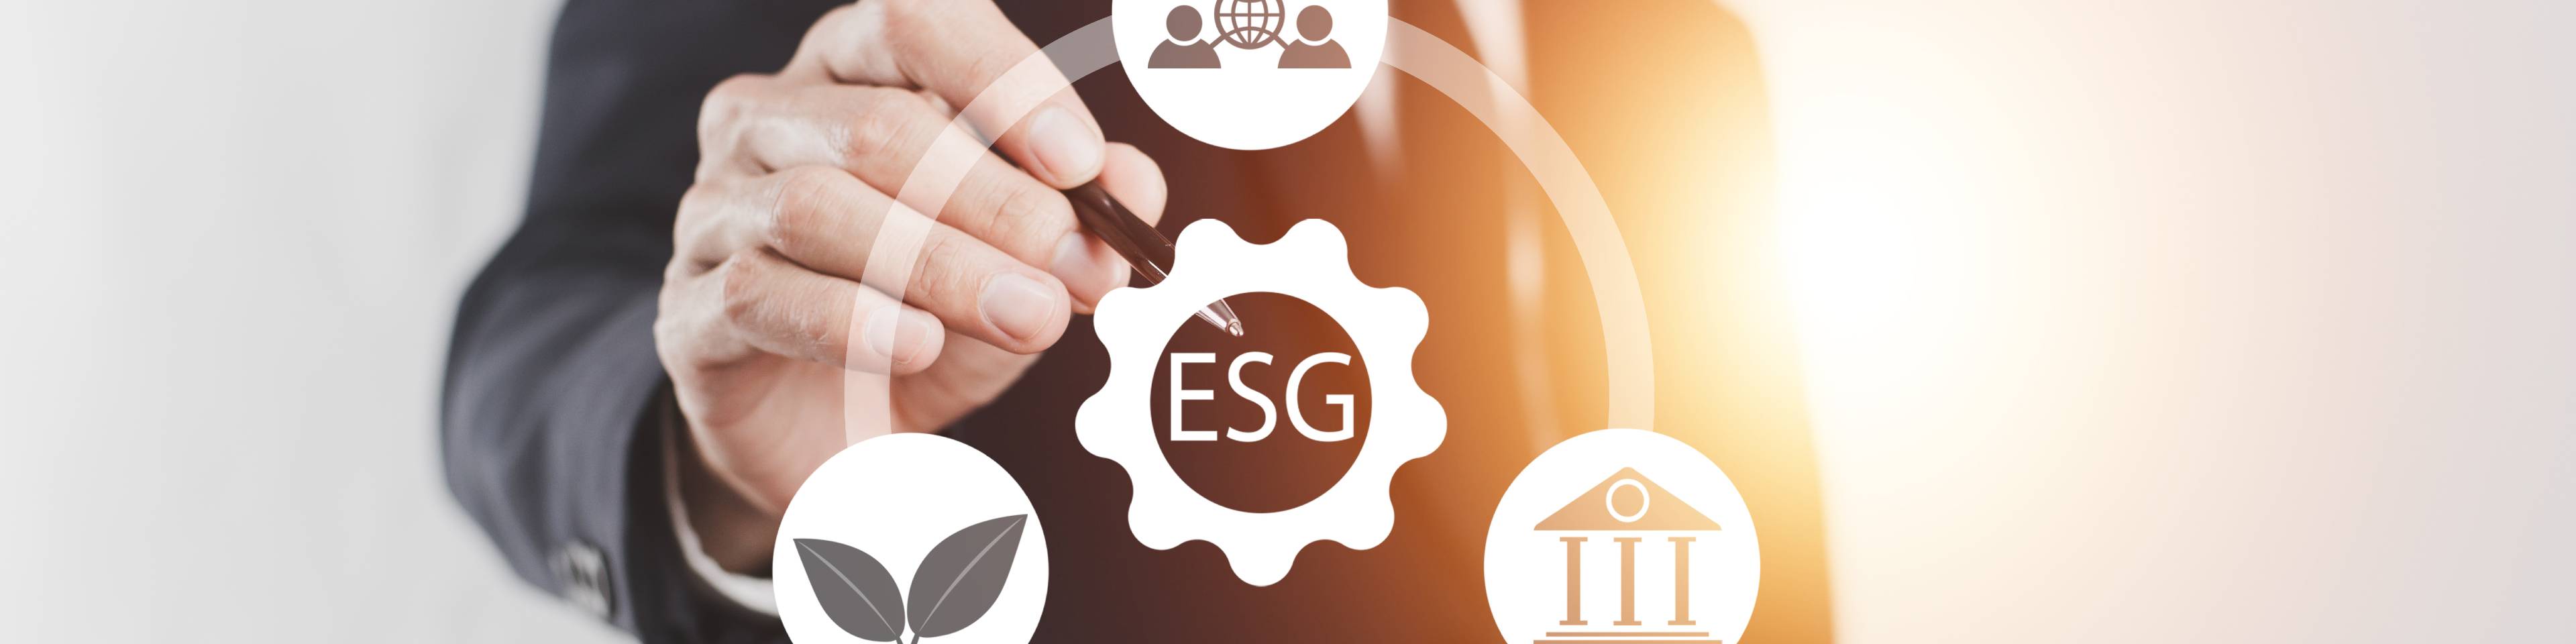 The ESG Ready Lawyer: Katten lawyers Johnjerica Hodge and India Williams lead firm’s newly launched practice focused on ESG risk and investigations